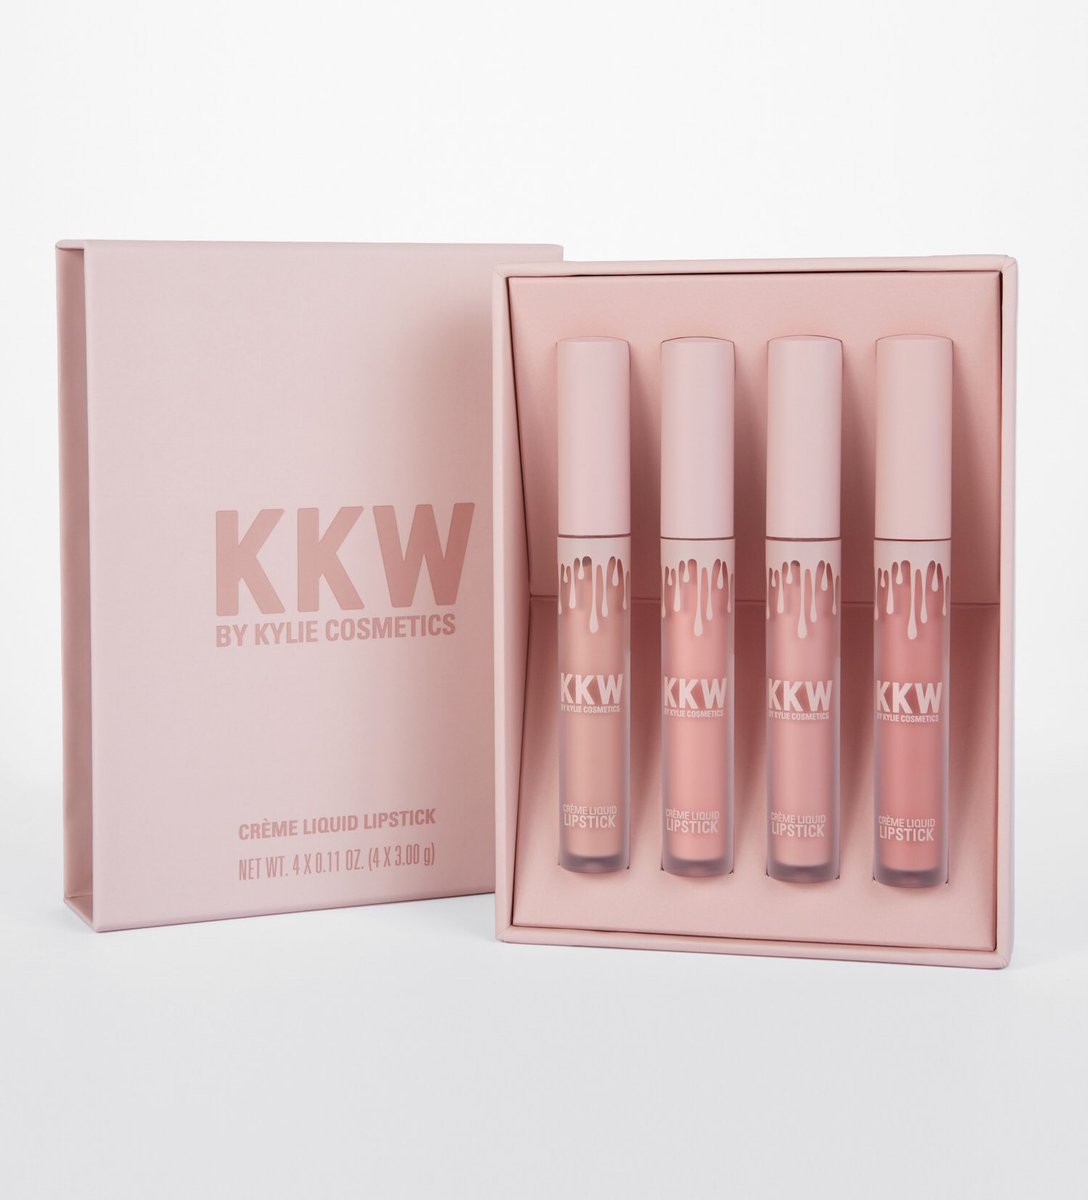 KKW X KYLIE liquid creme lip kits now available at https://t.co/CIEp69AbyG https://t.co/jJc9pKjLvk